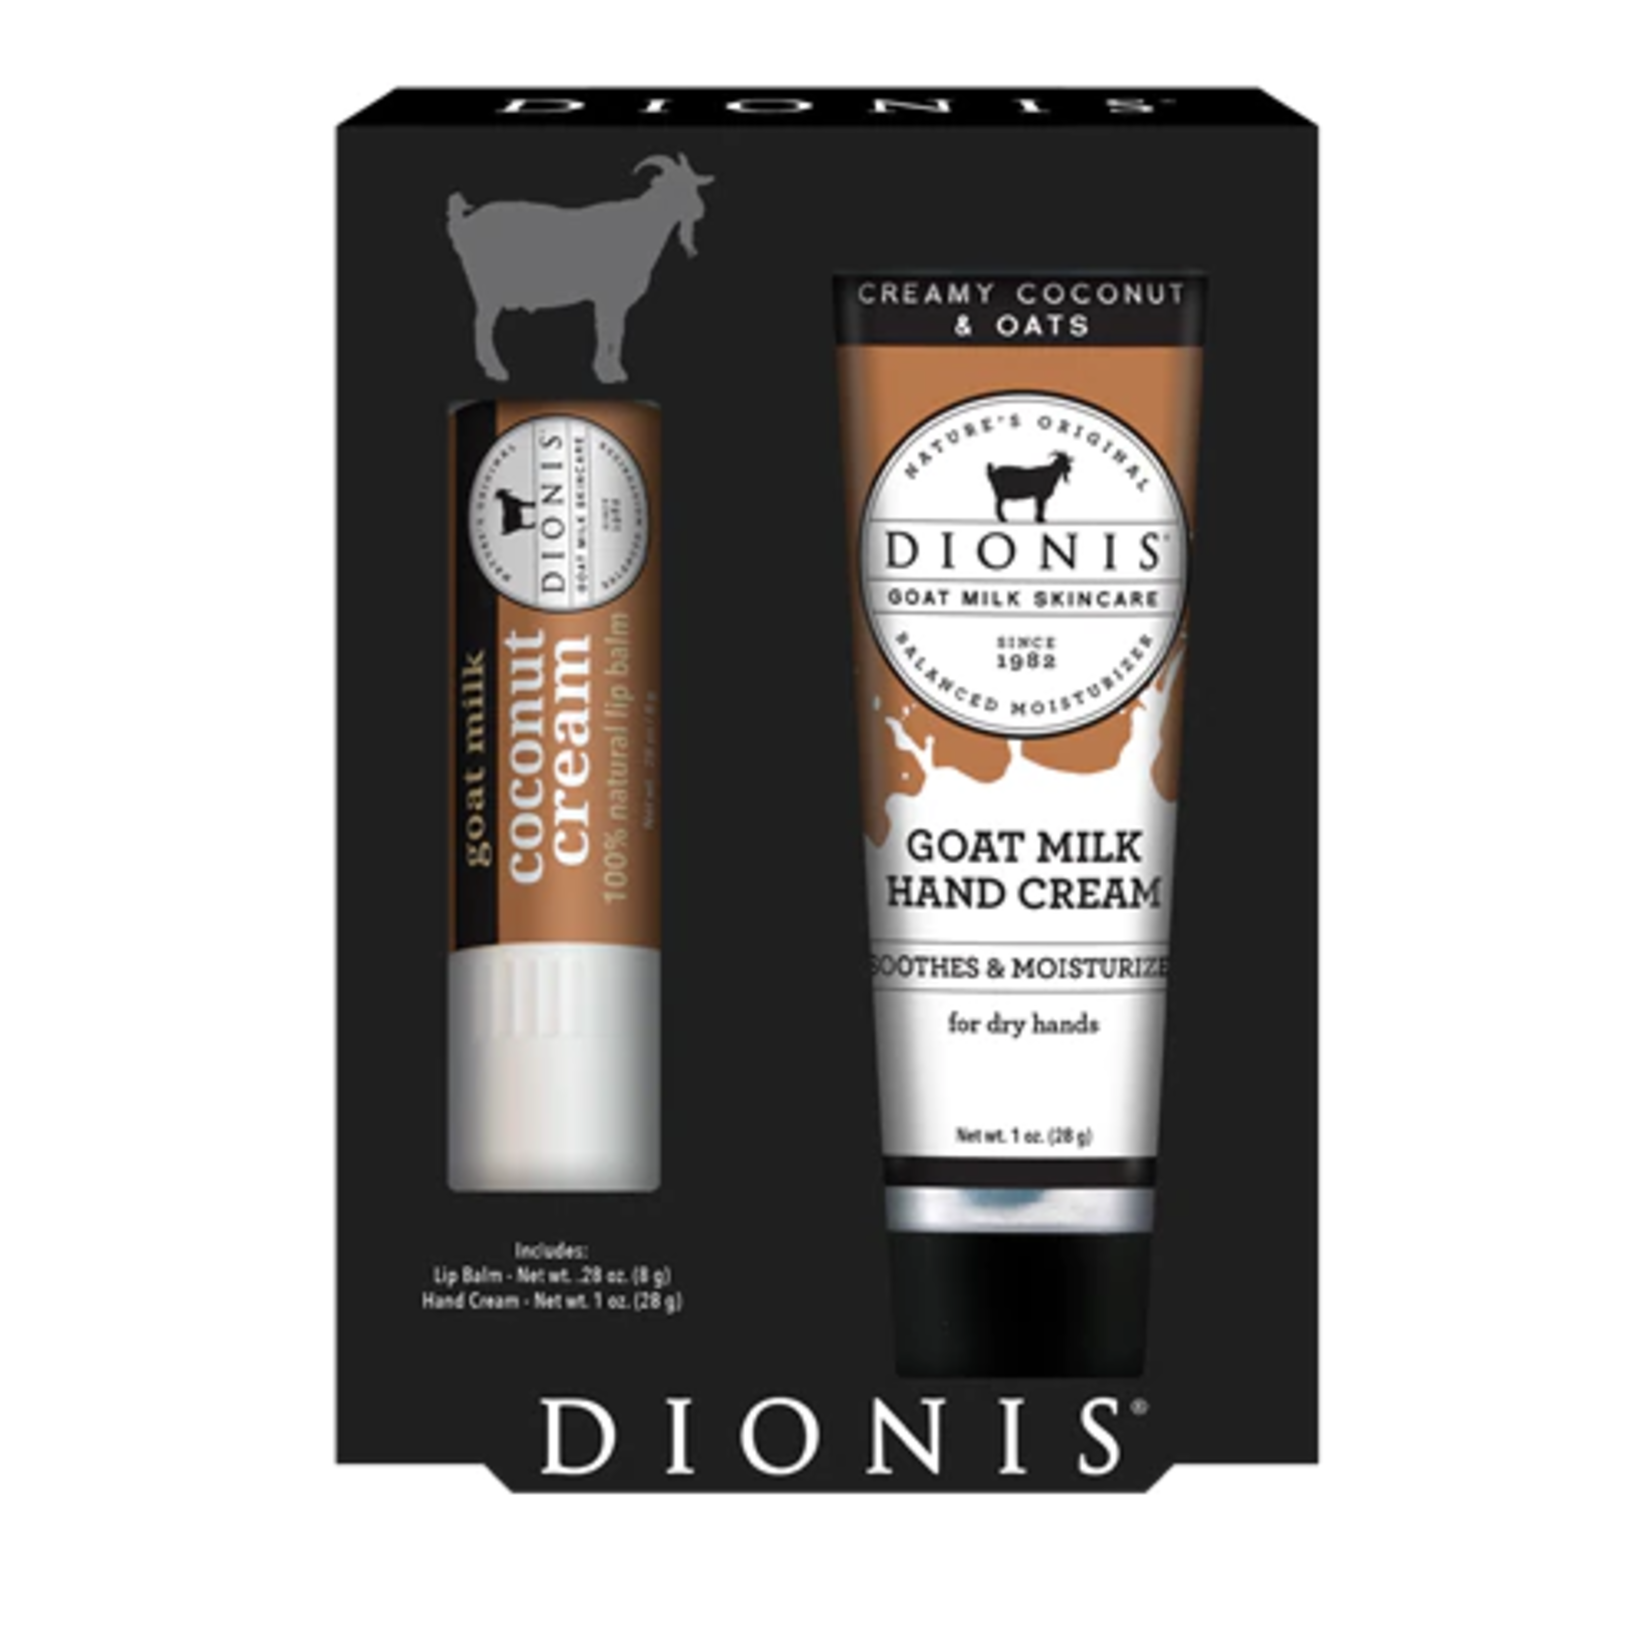 Dionis Dionis Gift Set Creamy Coconut & Oats